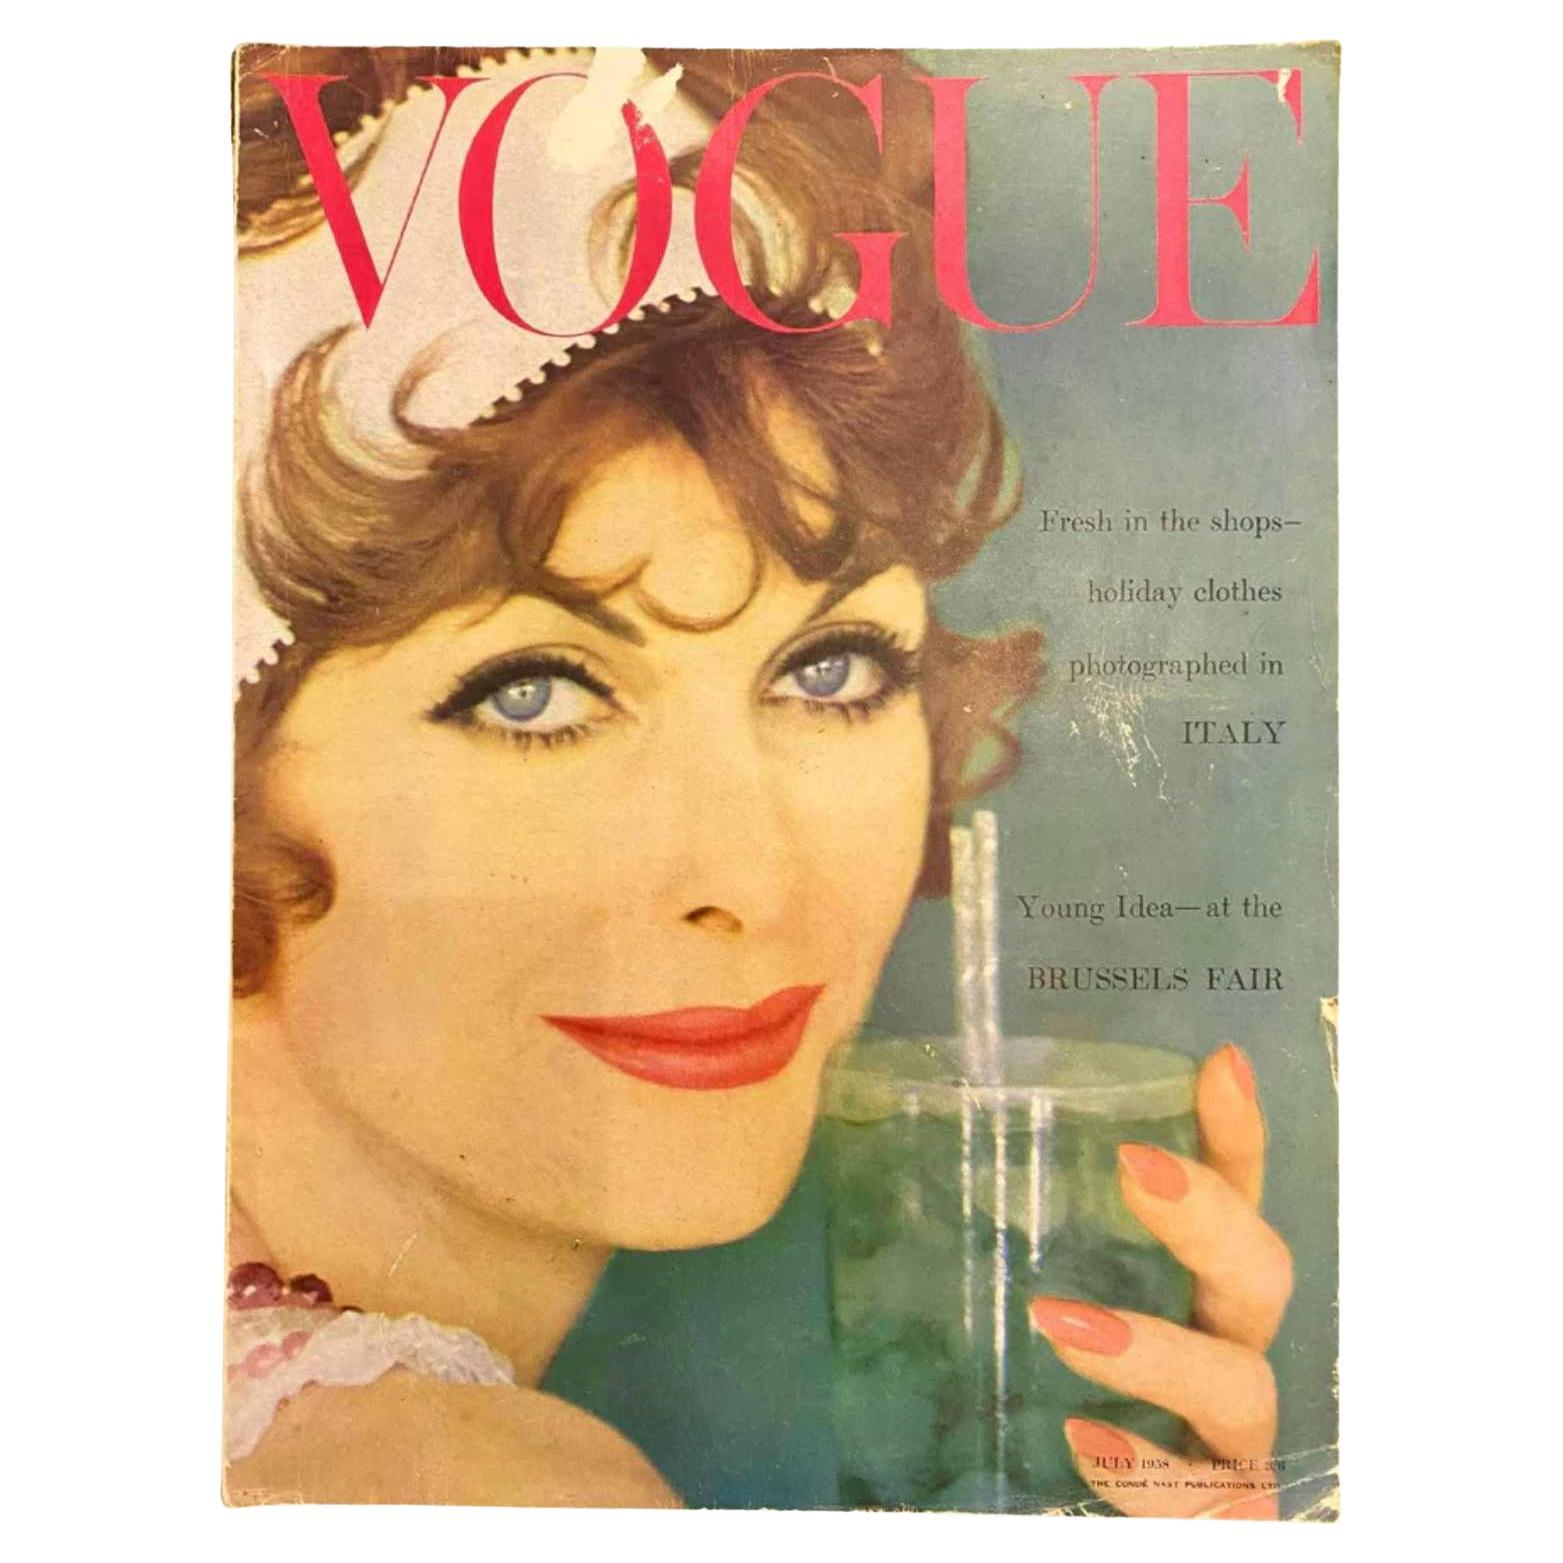 1958 Vogue - Cover by by Norman Parkinson